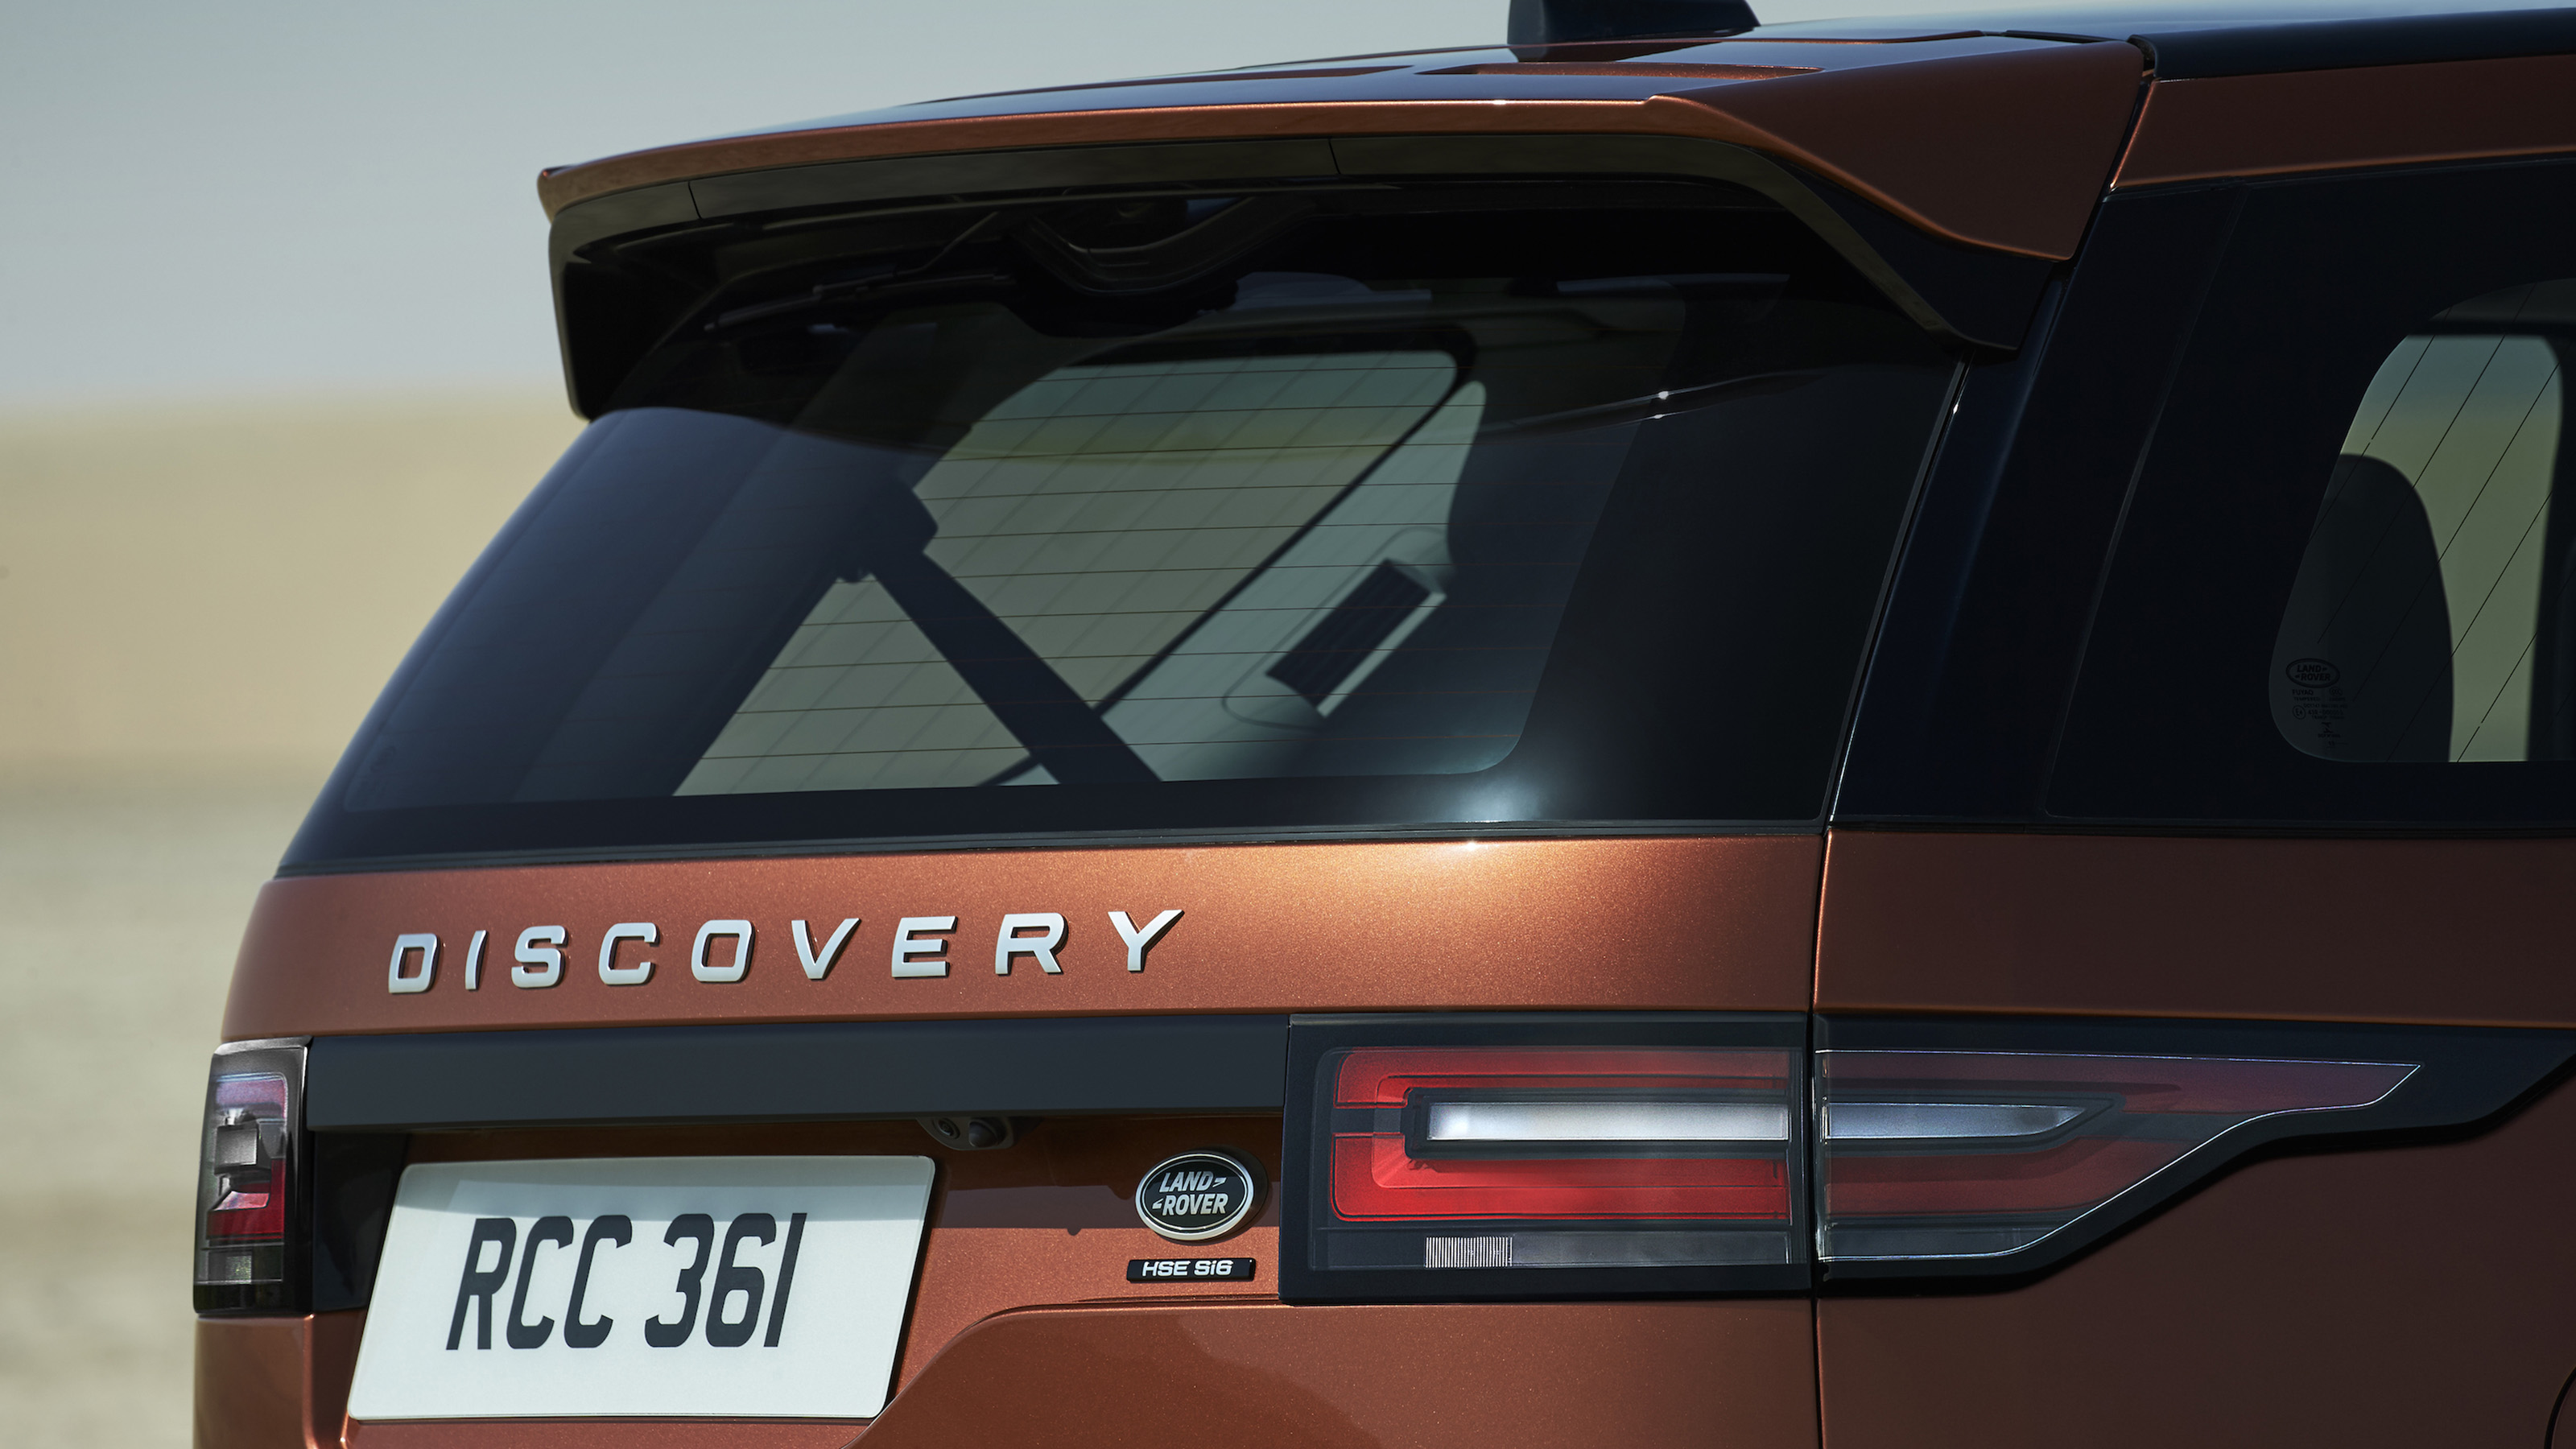 LAND ROVER DISCOVERY OVERVIEW